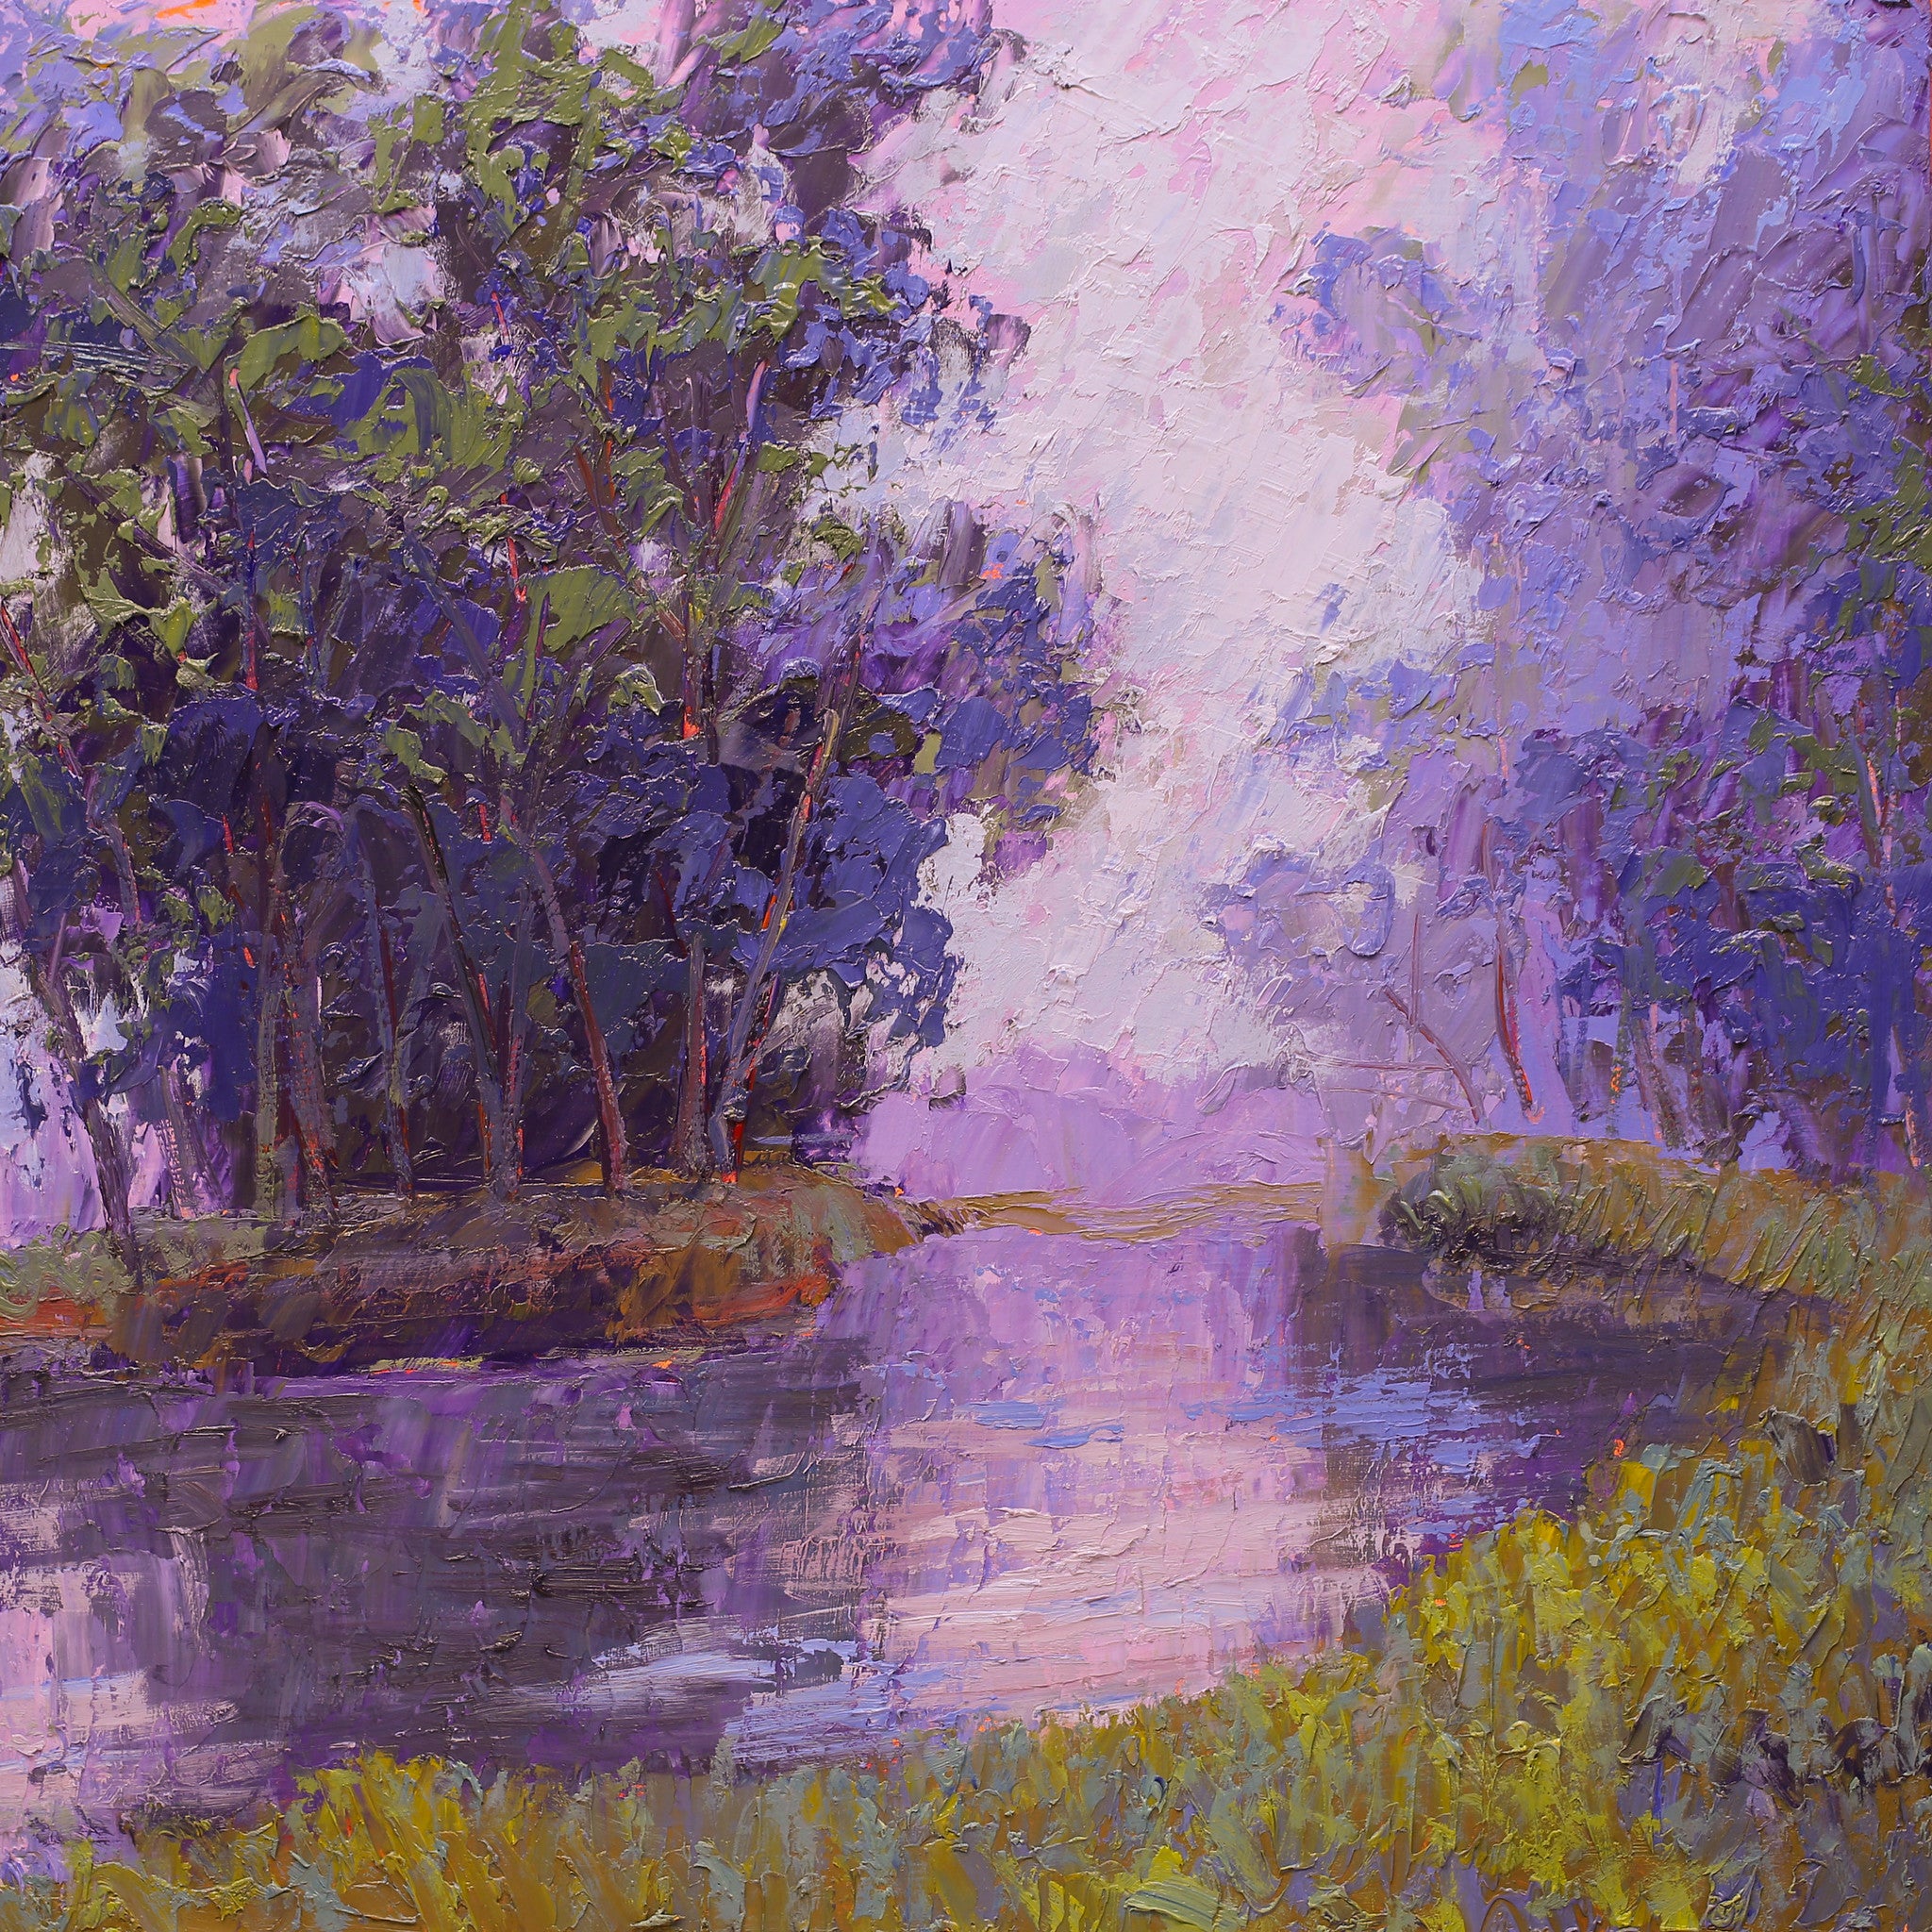 "Summer Morning in Ohio"  Kevin Liang 2019  Original oil on board with frame 18" x 18"